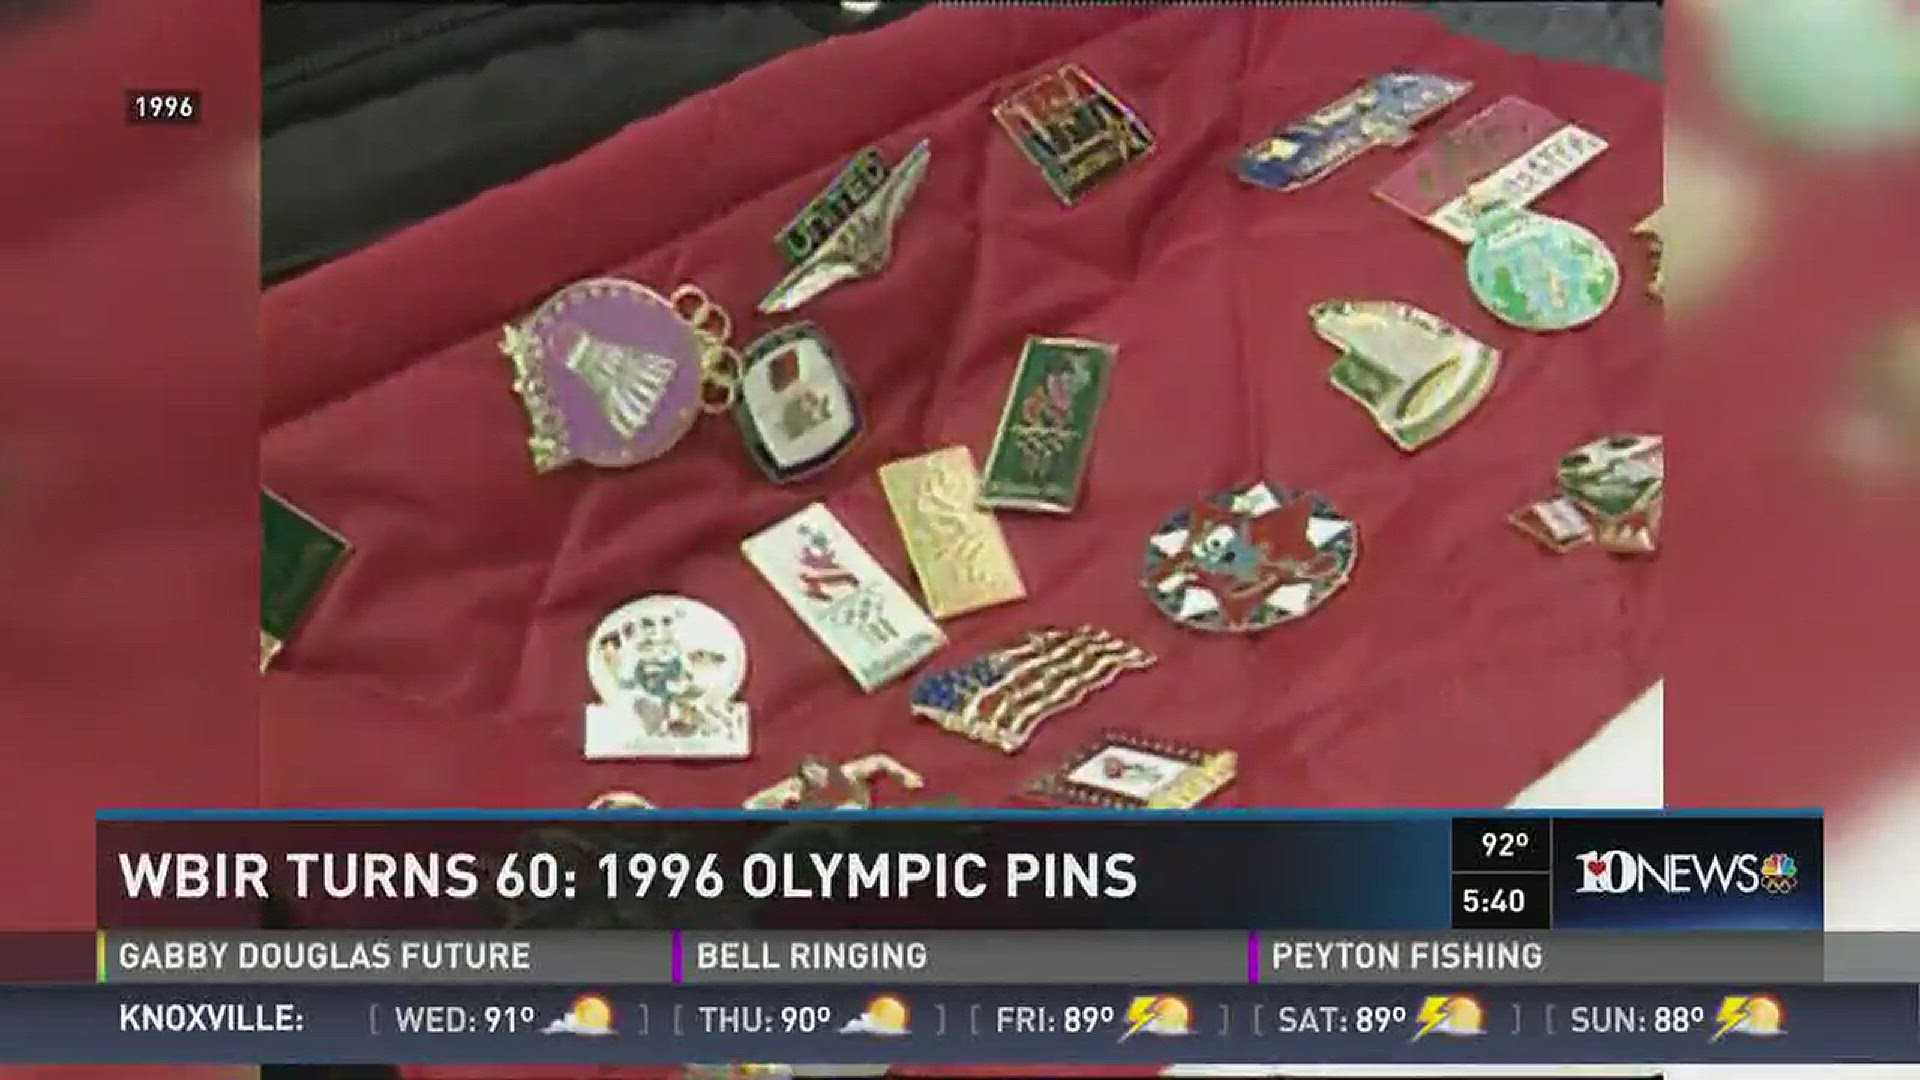 To celebrate WBIR's 60th Anniversary, we take a look back on the 1996 Olympic Games.